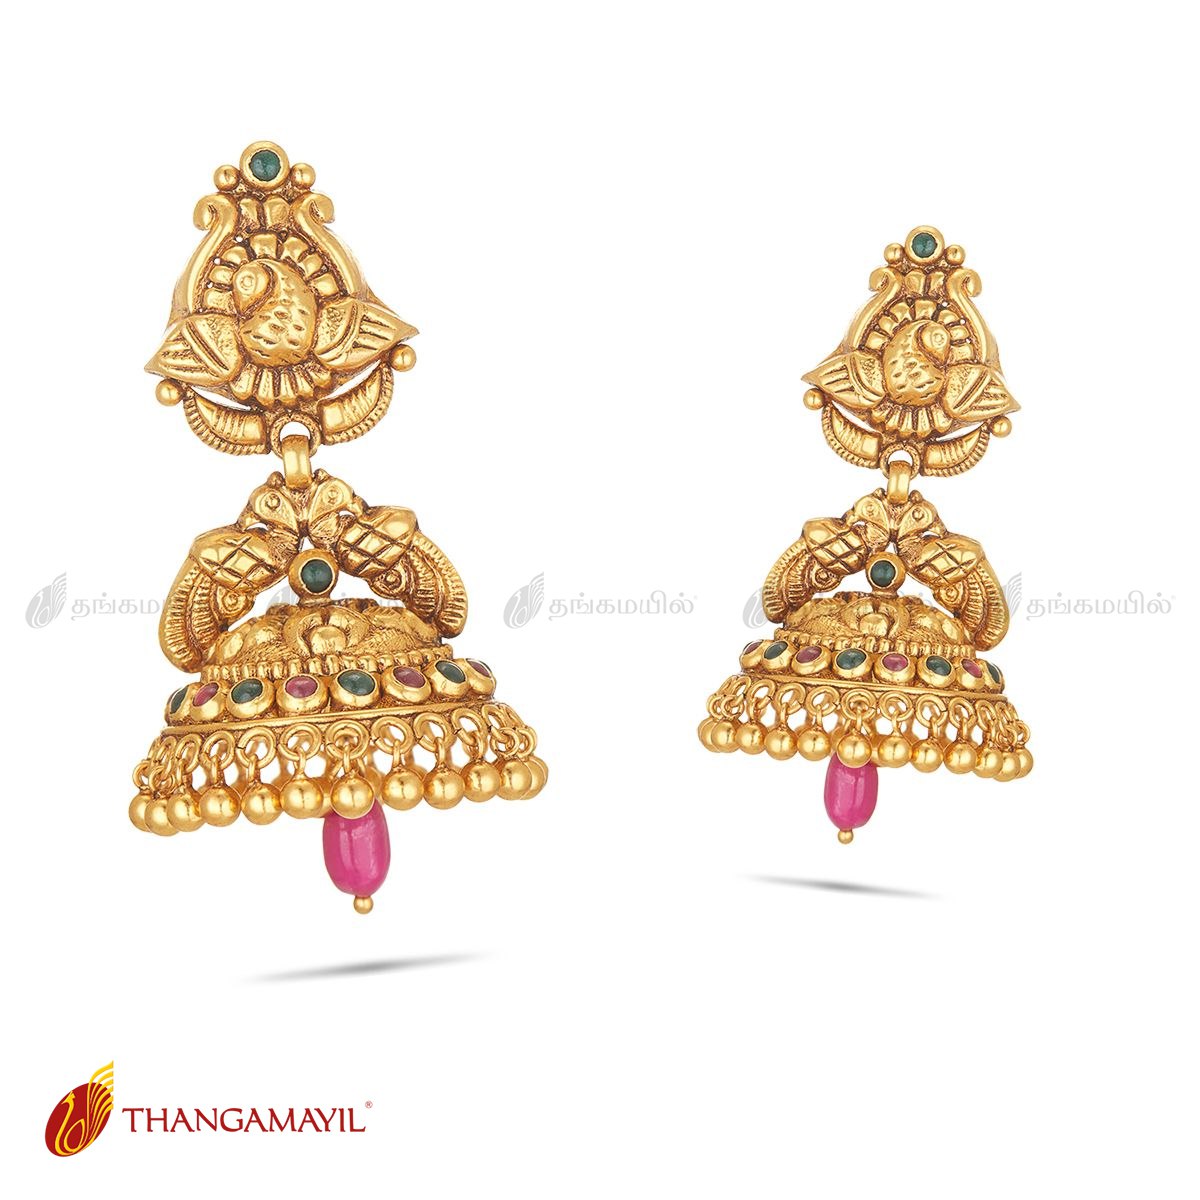 THANGAMAYIL JEWELLERY.....

Product Name: Bridal Wear Gold Jhumka Earring

Gross Weight: 12.580 Gms

Available Showroom: ARUPPUKOTTAI

🛍BUY NOW

CONTACT MORE DETAILS:
1800 889 7080.